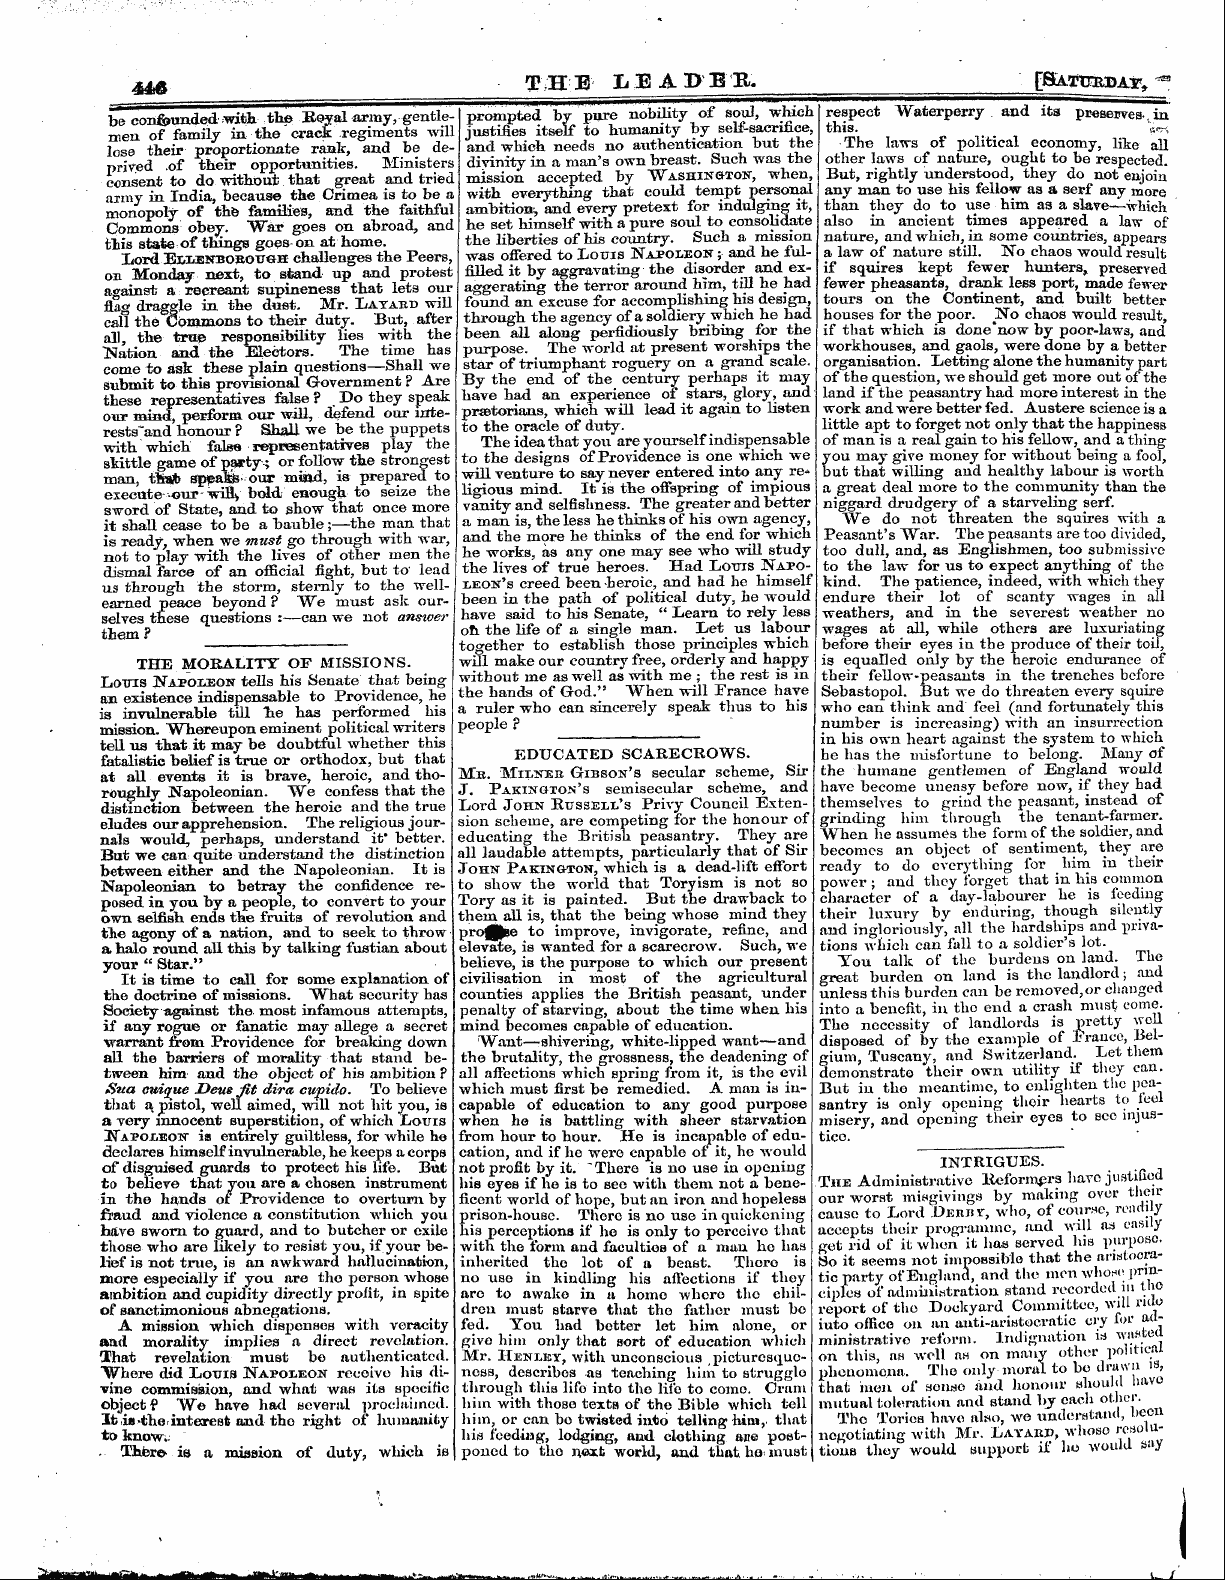 Leader (1850-1860): jS F Y, 1st edition: 14